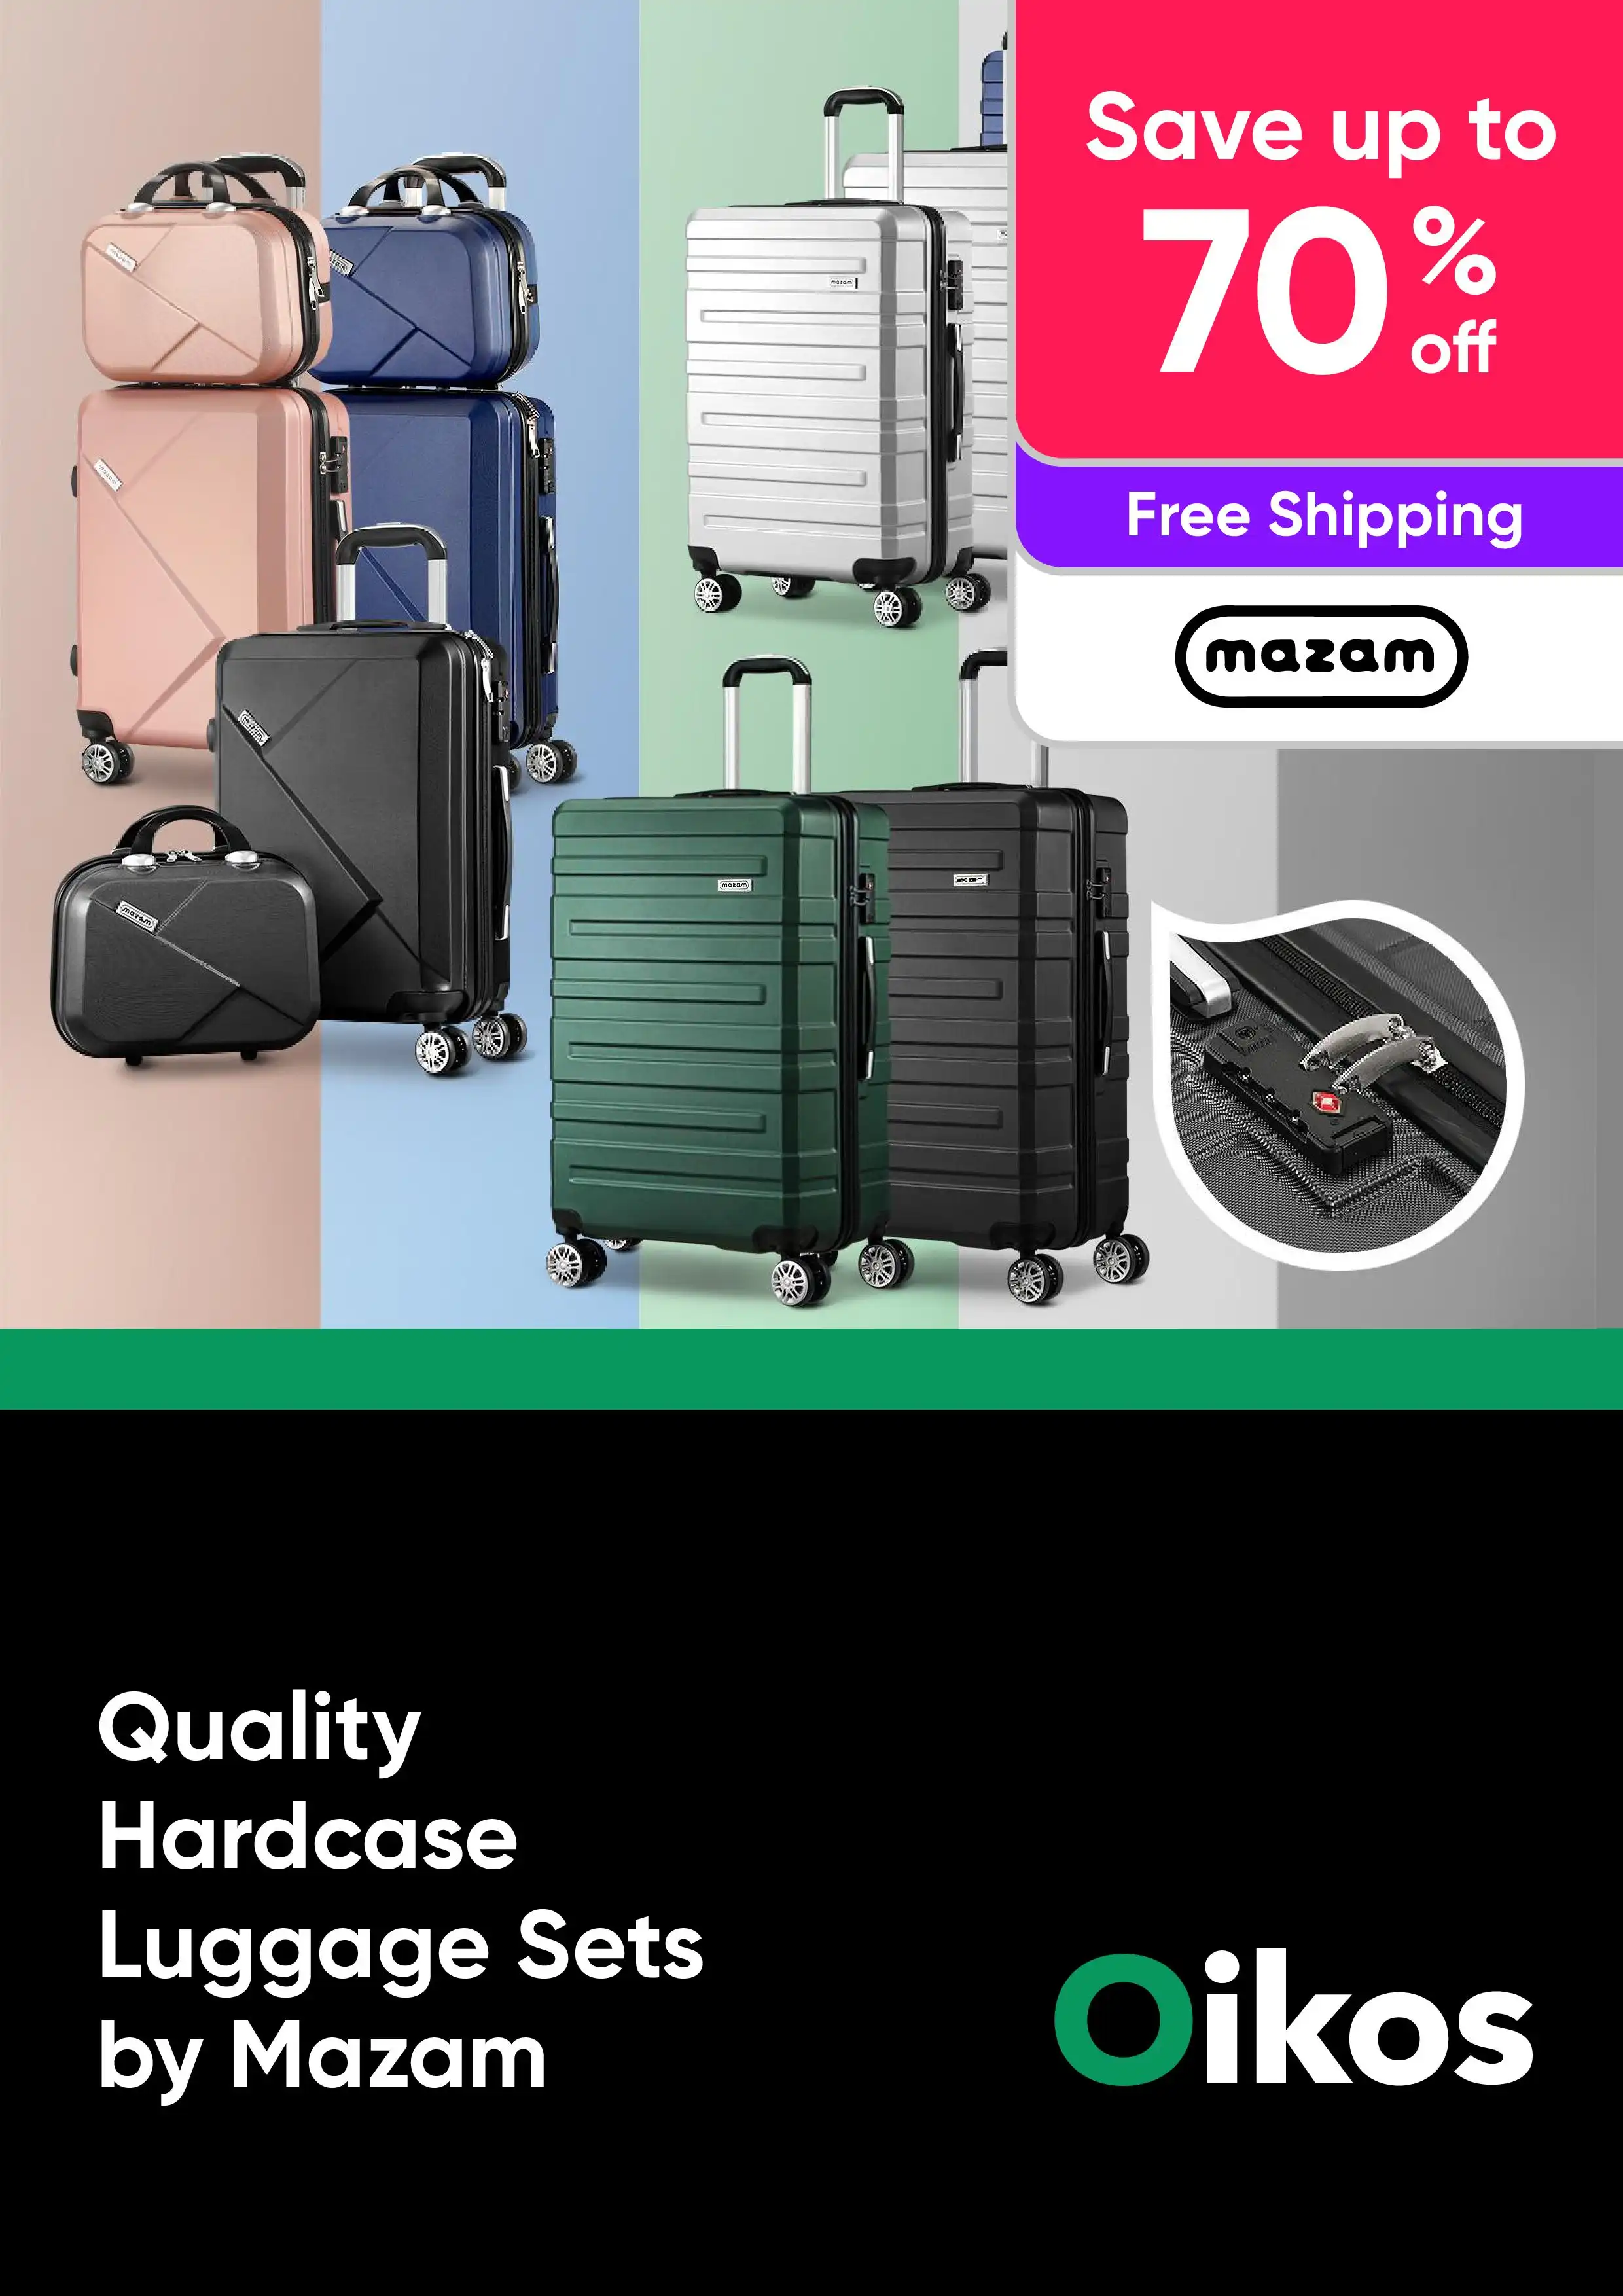 Free Shipping on Quality Hardcase Luggage Sets by Mazam - Up to 70% Off RRP Sale